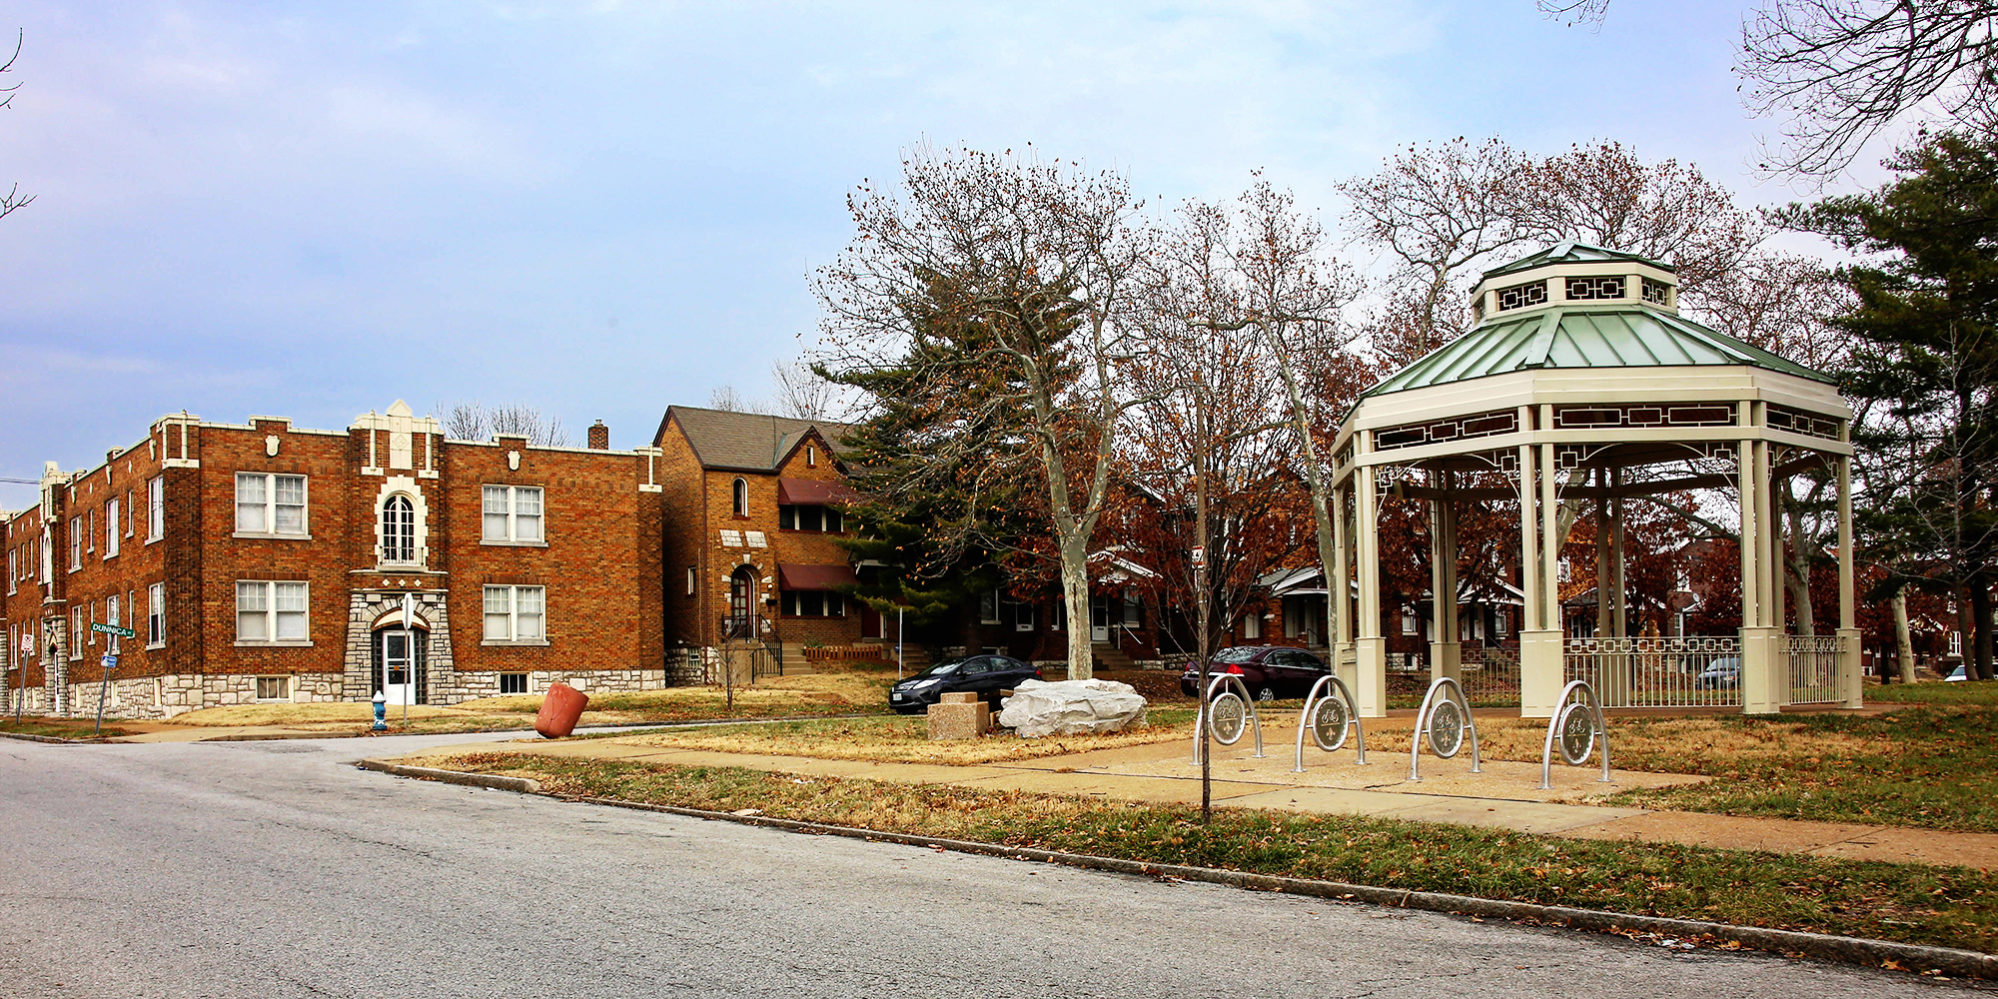 Amberg Park in the Dutchtown neighborhood of St. Louis, MO. Photo by Paul Sableman.